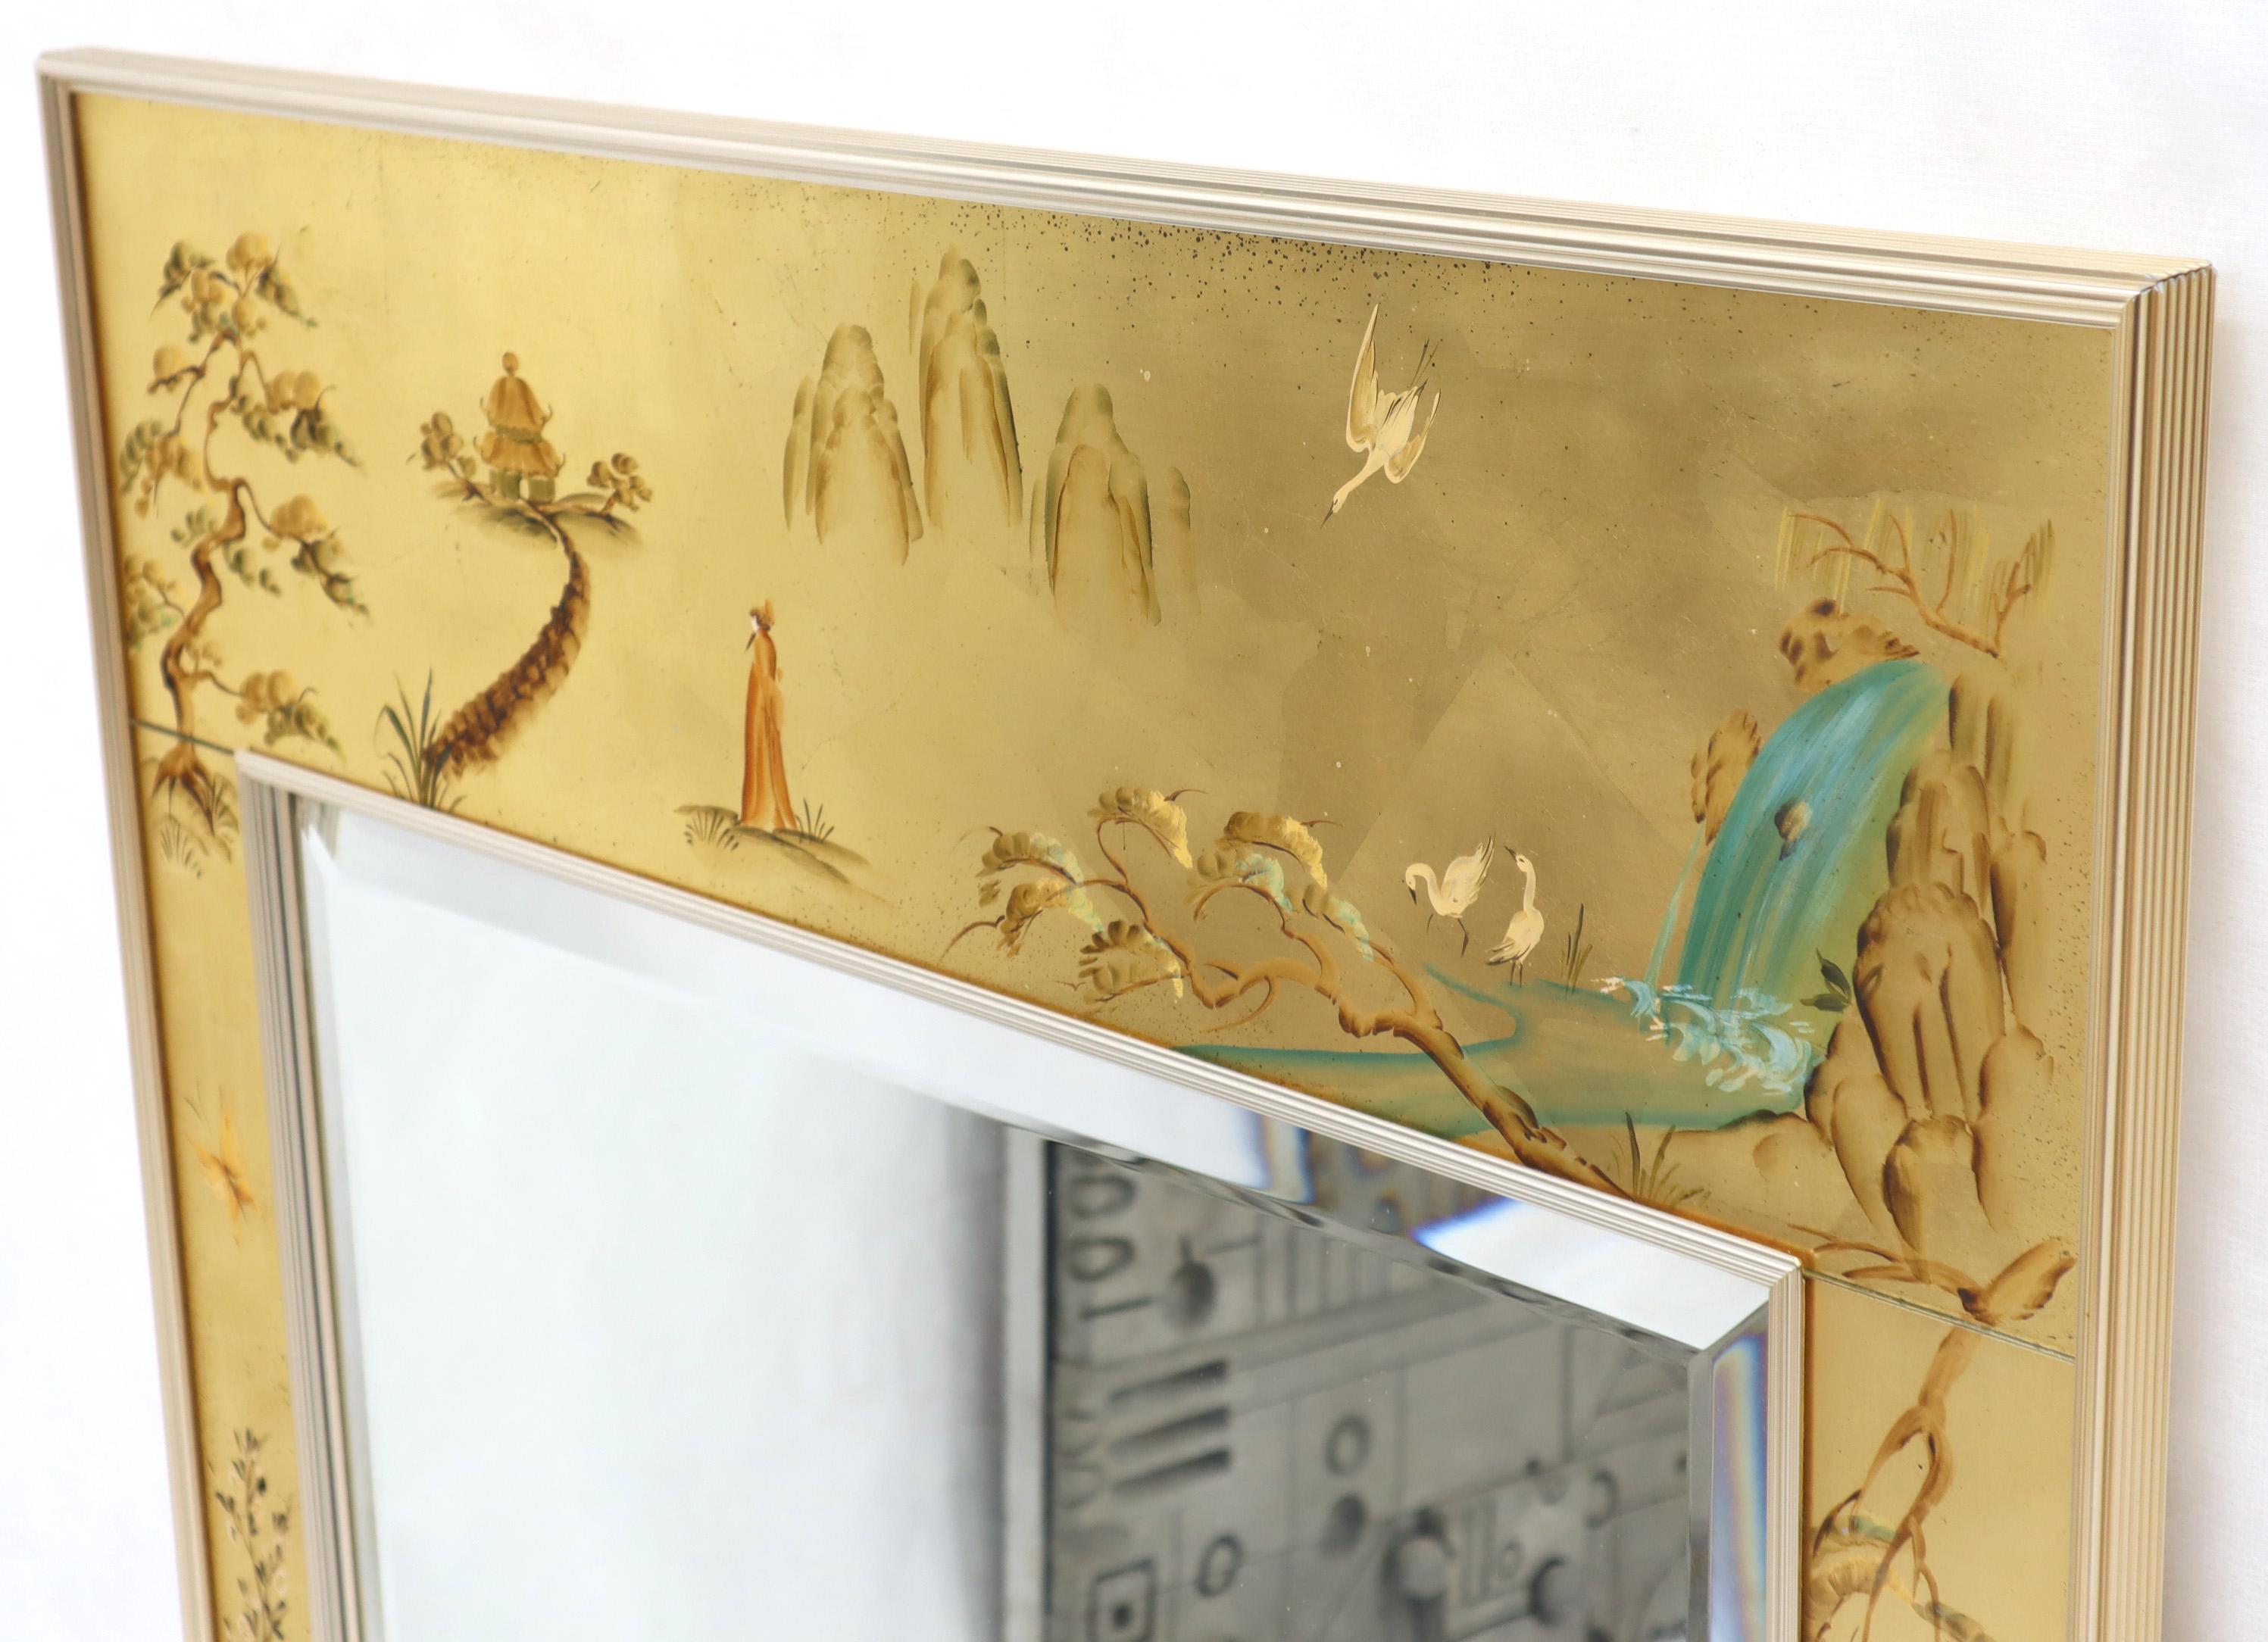 Reverse painted gold leaf rectangular frame decorative mirror by La Barge. Artist-signed and dated 1979.